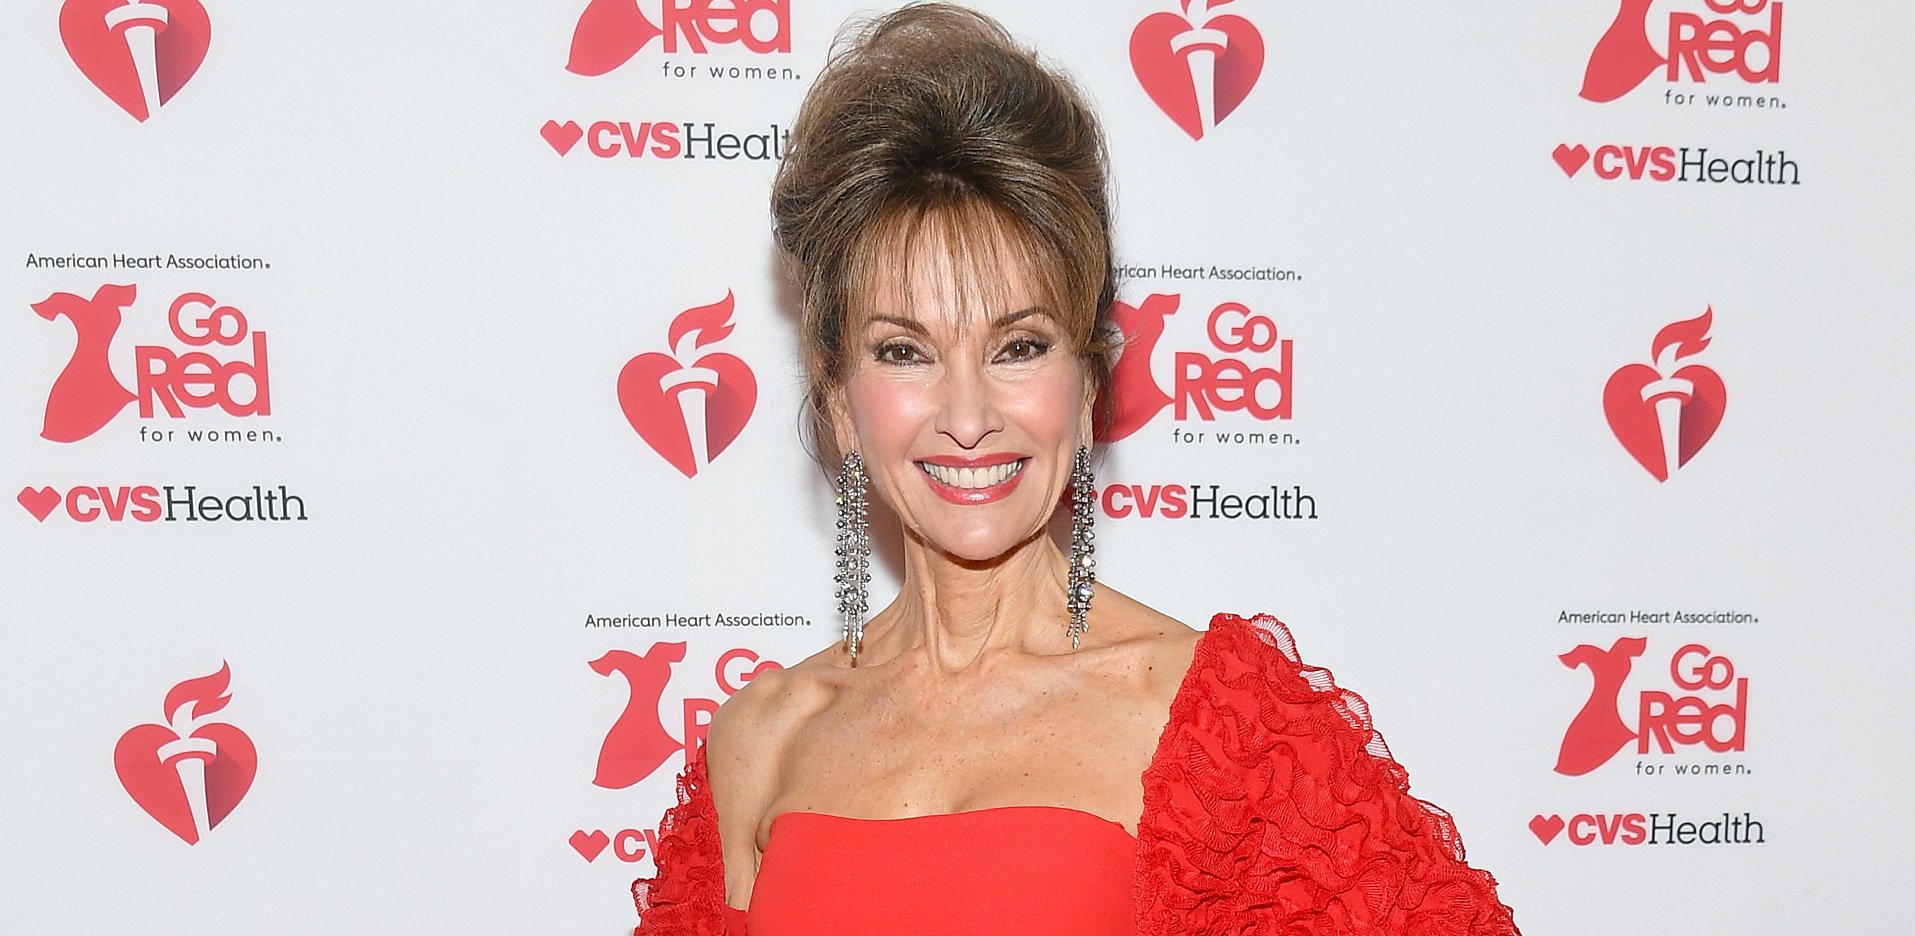 Susan Lucci of All My Children in a red dress on a red and white step and repeat